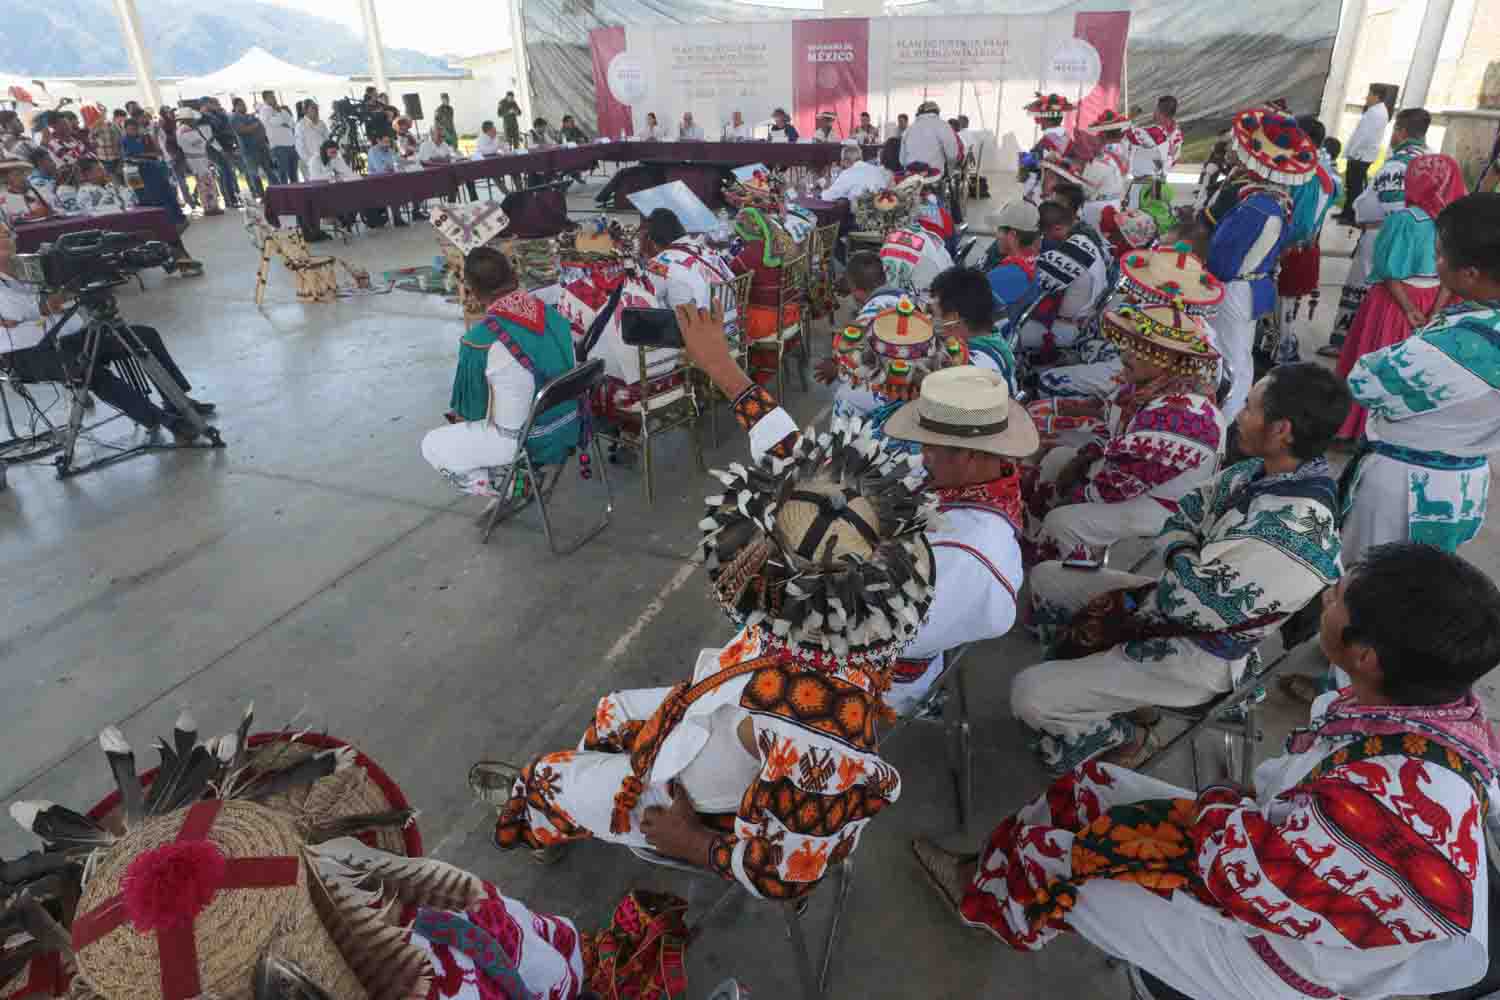 meeting of AMLO and Wixarika people in Jalisco